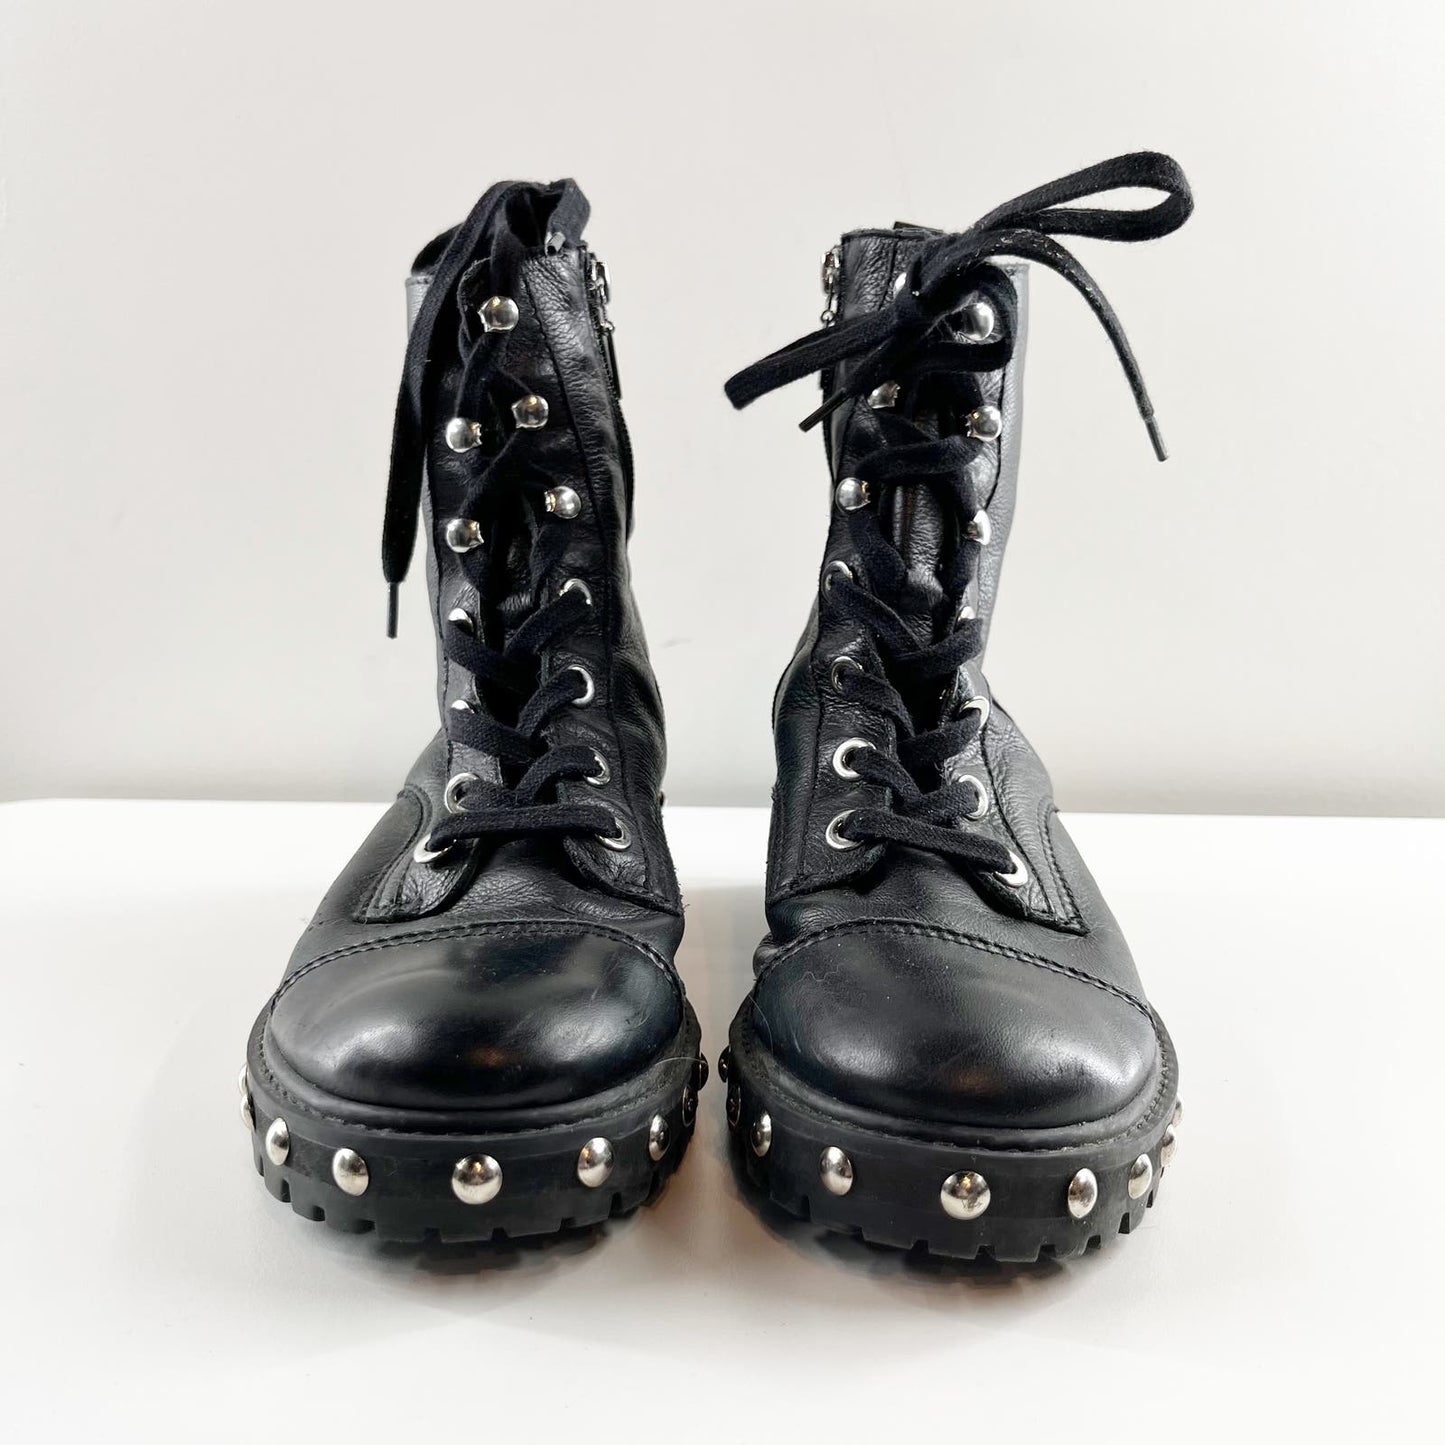 Schutz Andrea Ankle Combat Boots Booties Studded Leather Black 9.5